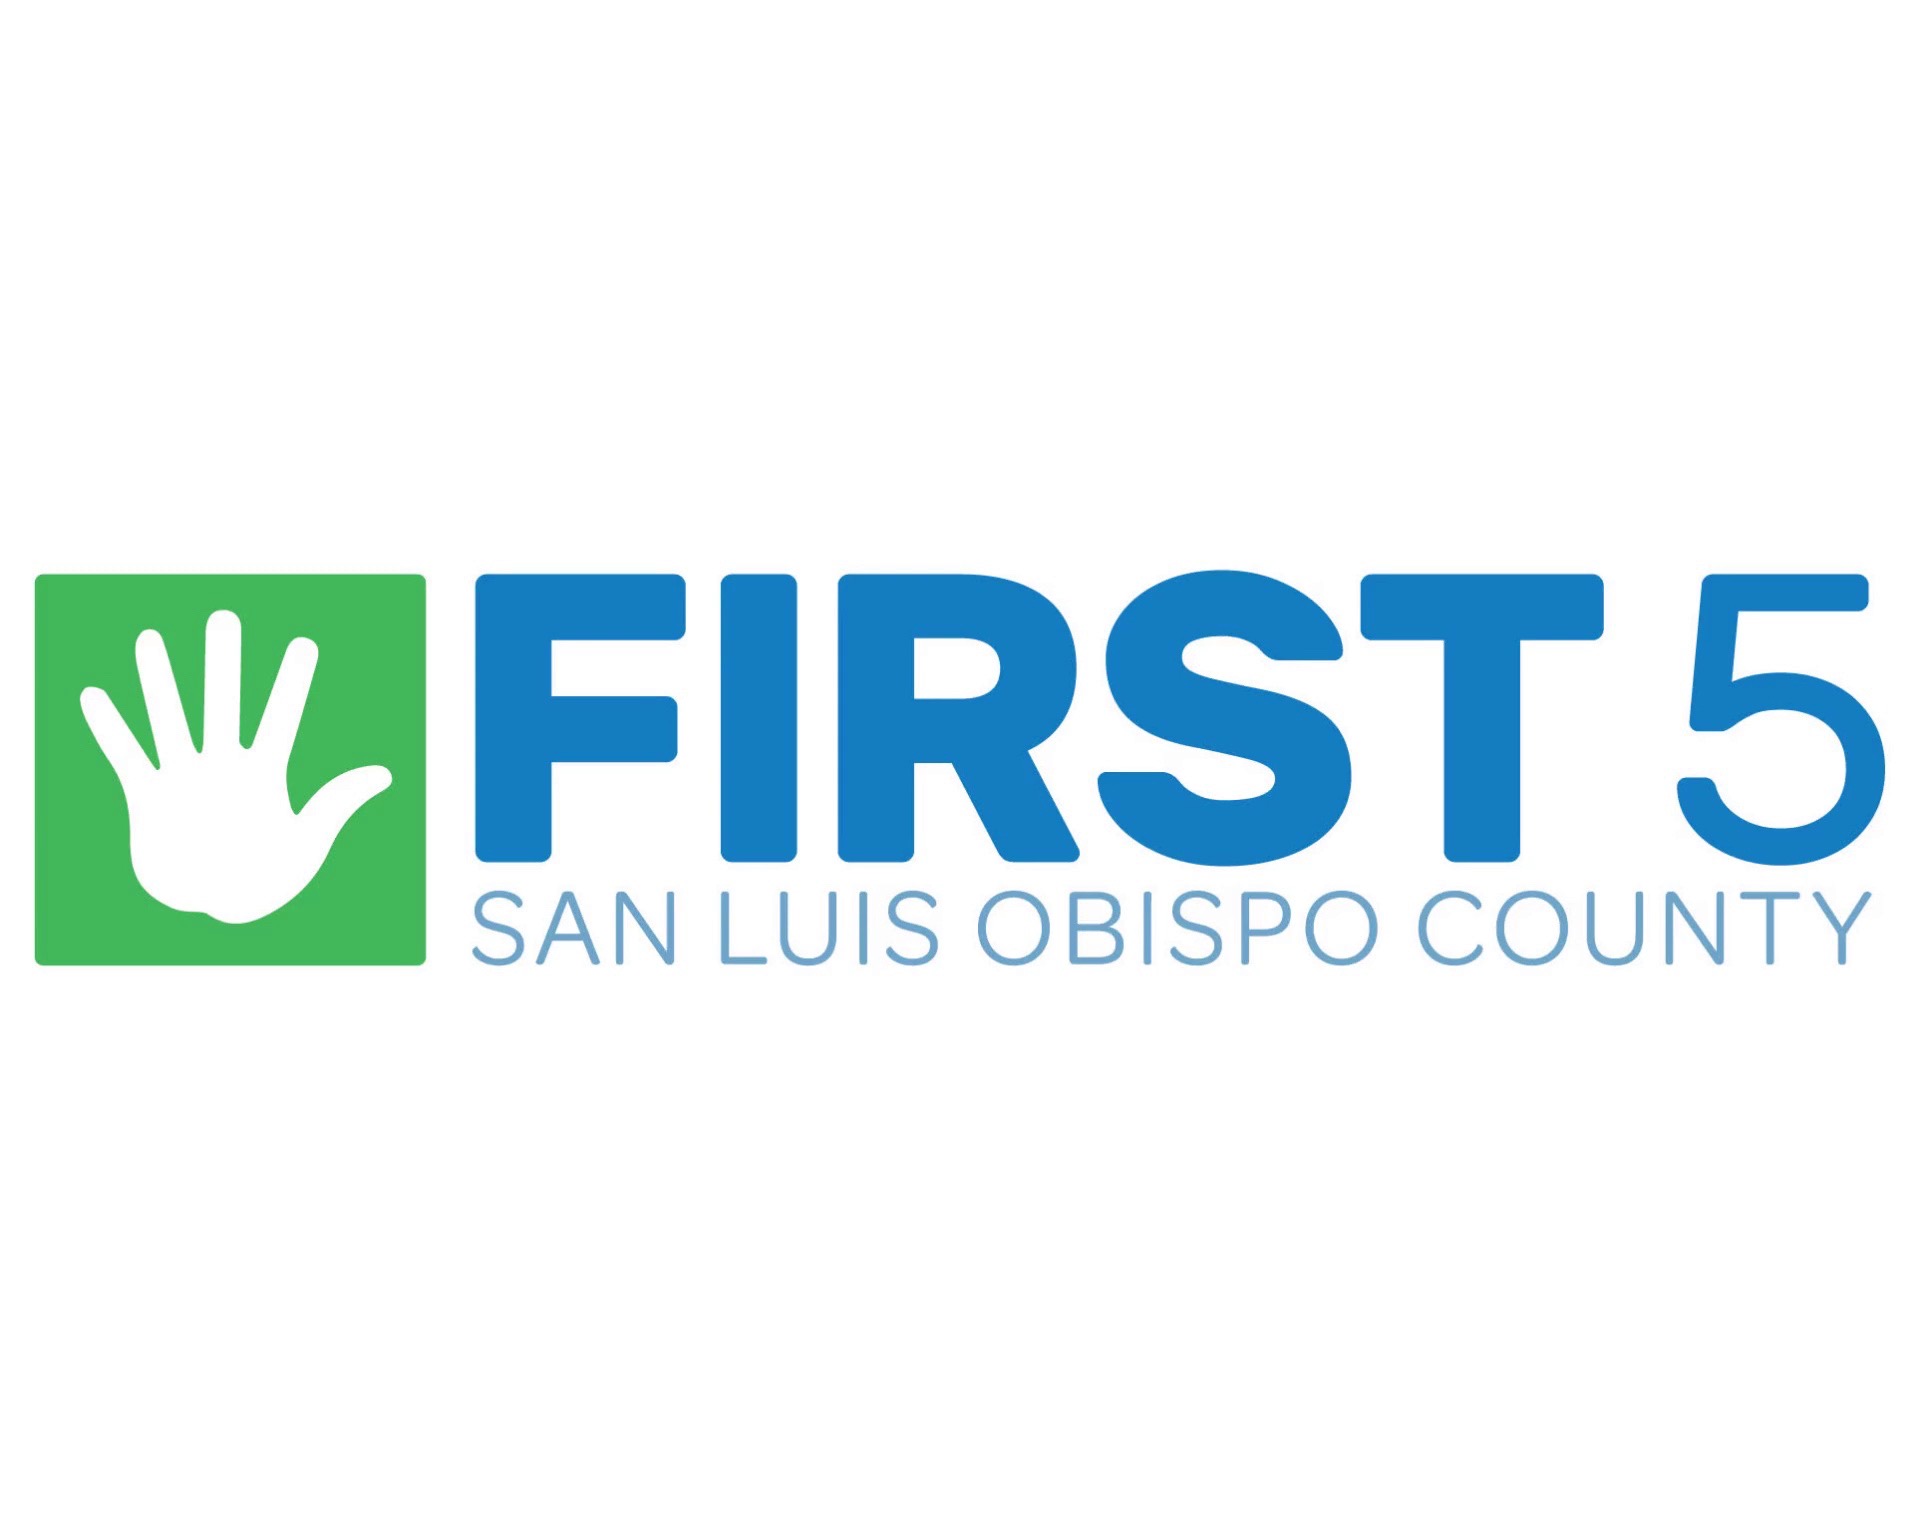 First 5 SLO County Funds Family Support Counseling Program • Atascadero News